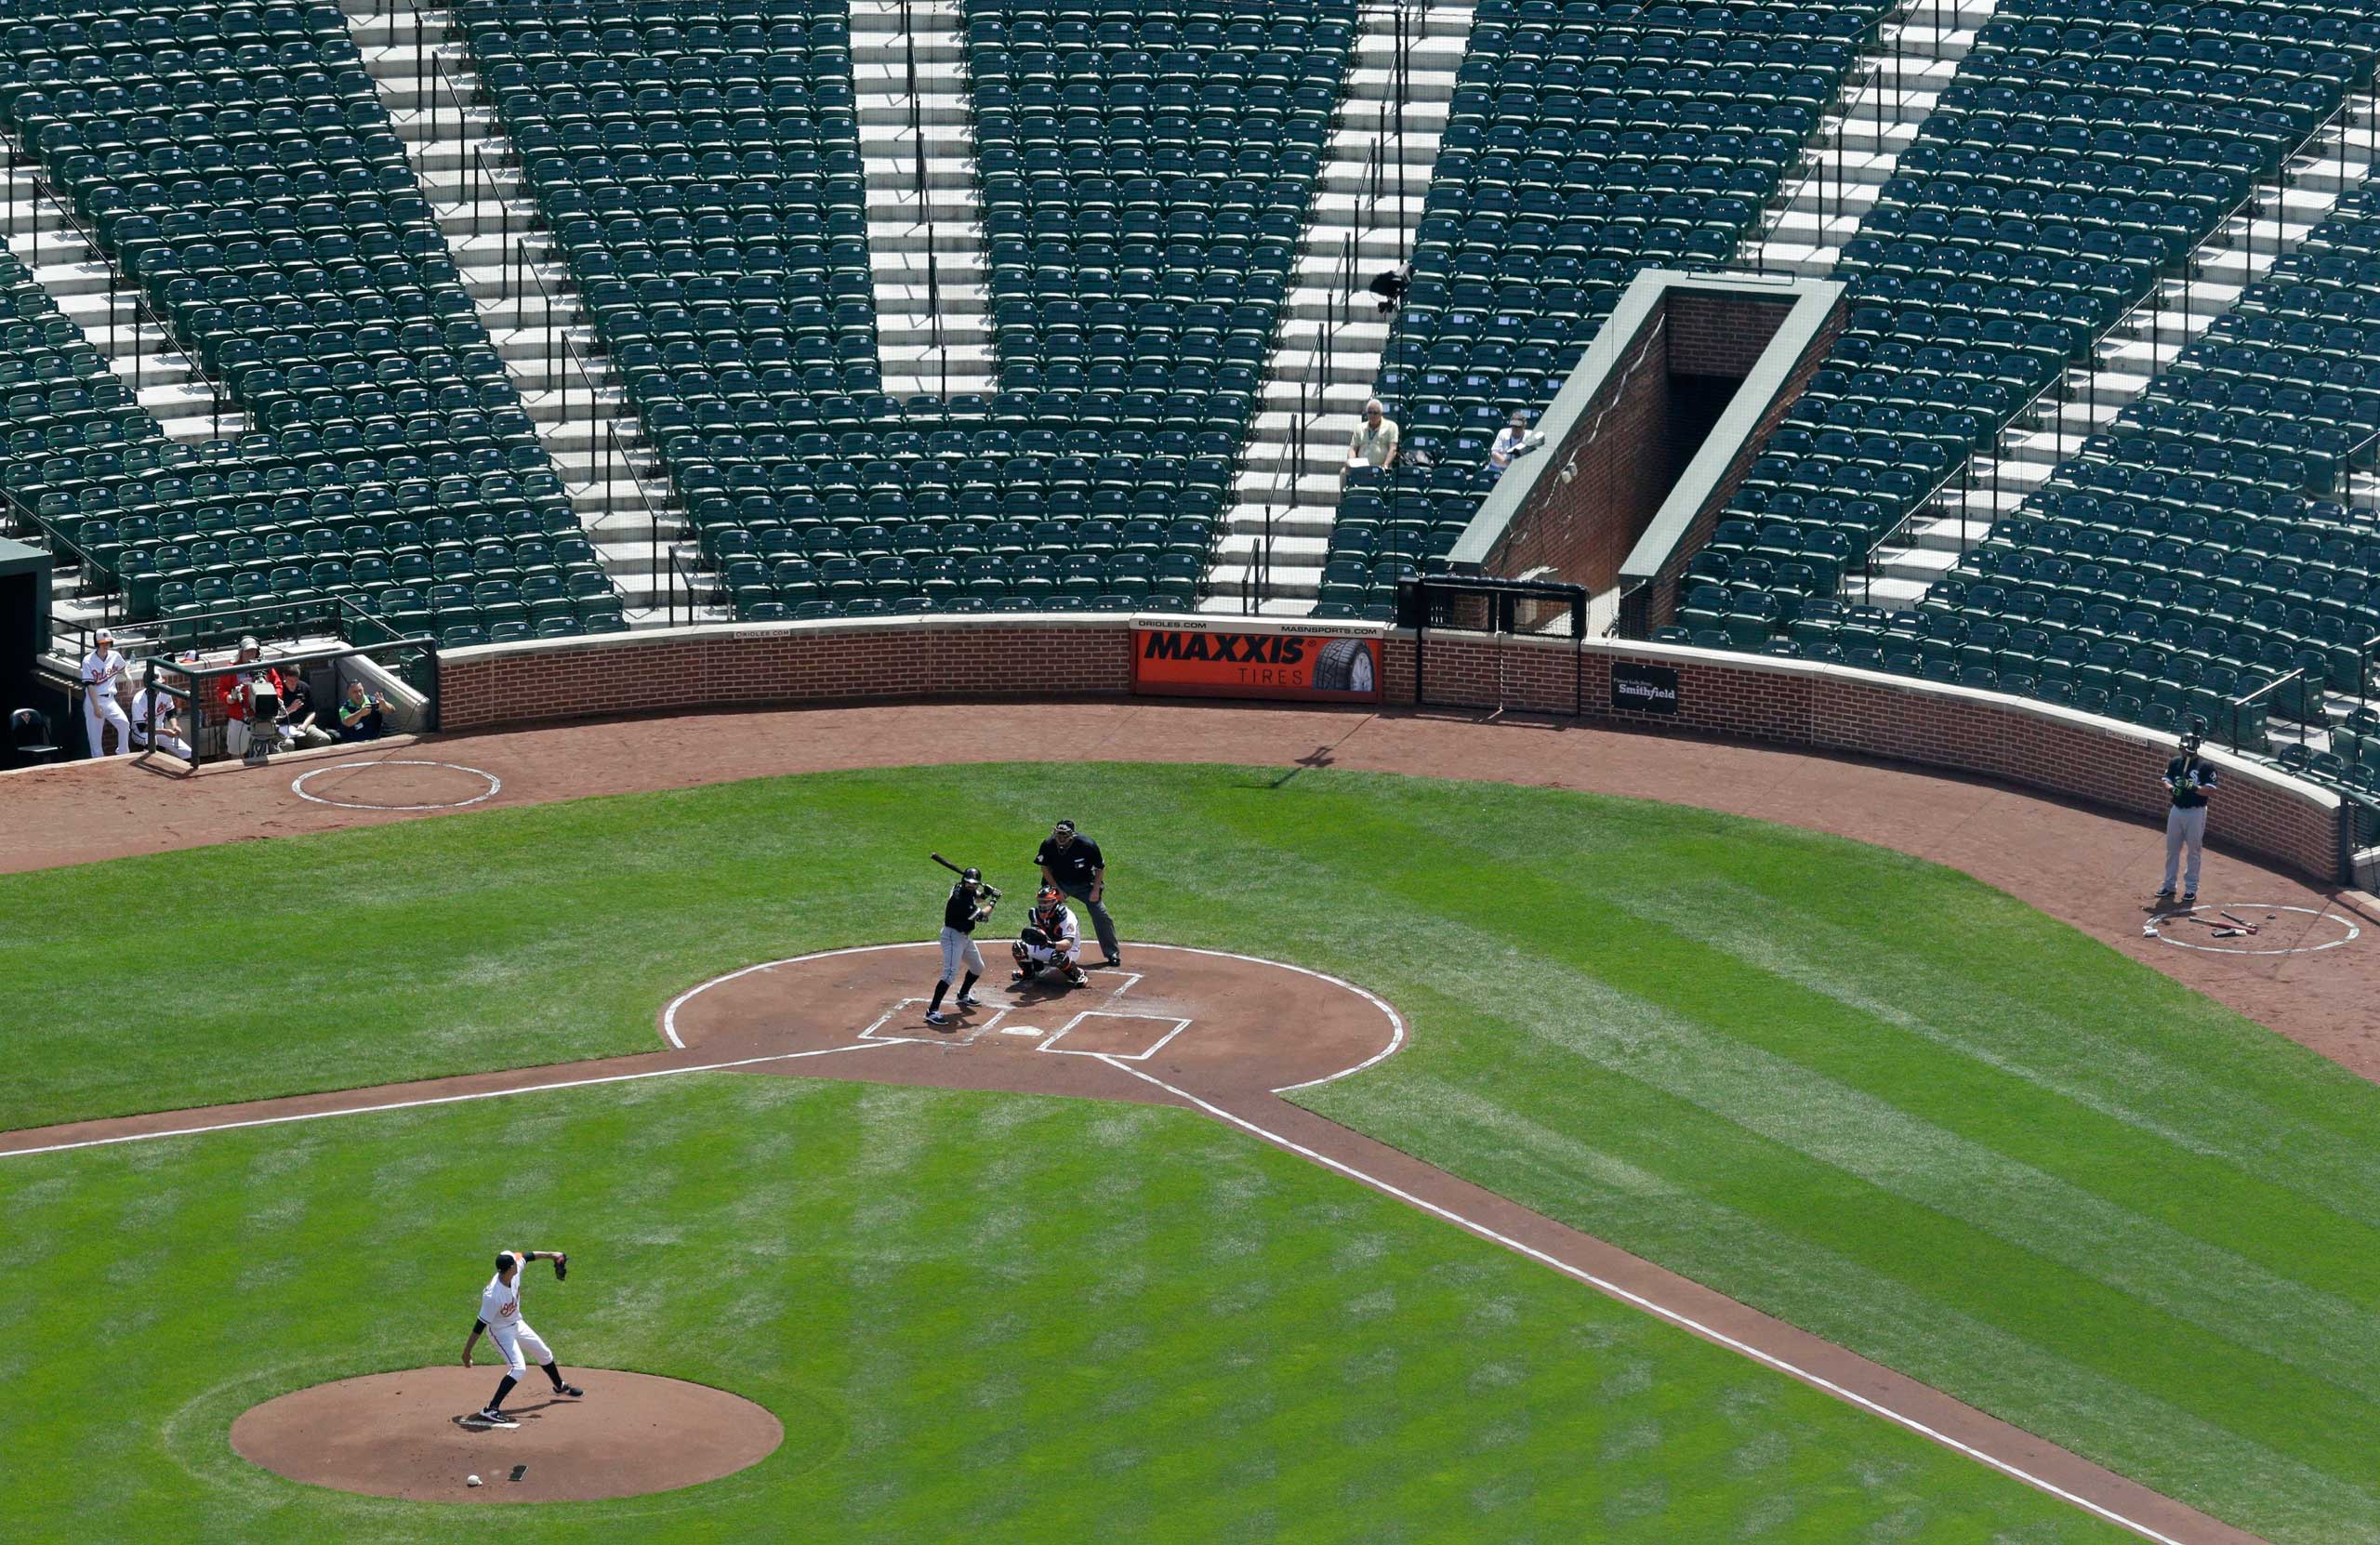 Baltimore Orioles starting pitcher Ubaldo Jimenez throws to Chicago White Sox's Adam Eaton in the first inning of a baseball game played in an empty Oriole Park at Camden Yards in Baltimore on April 29, 2015.